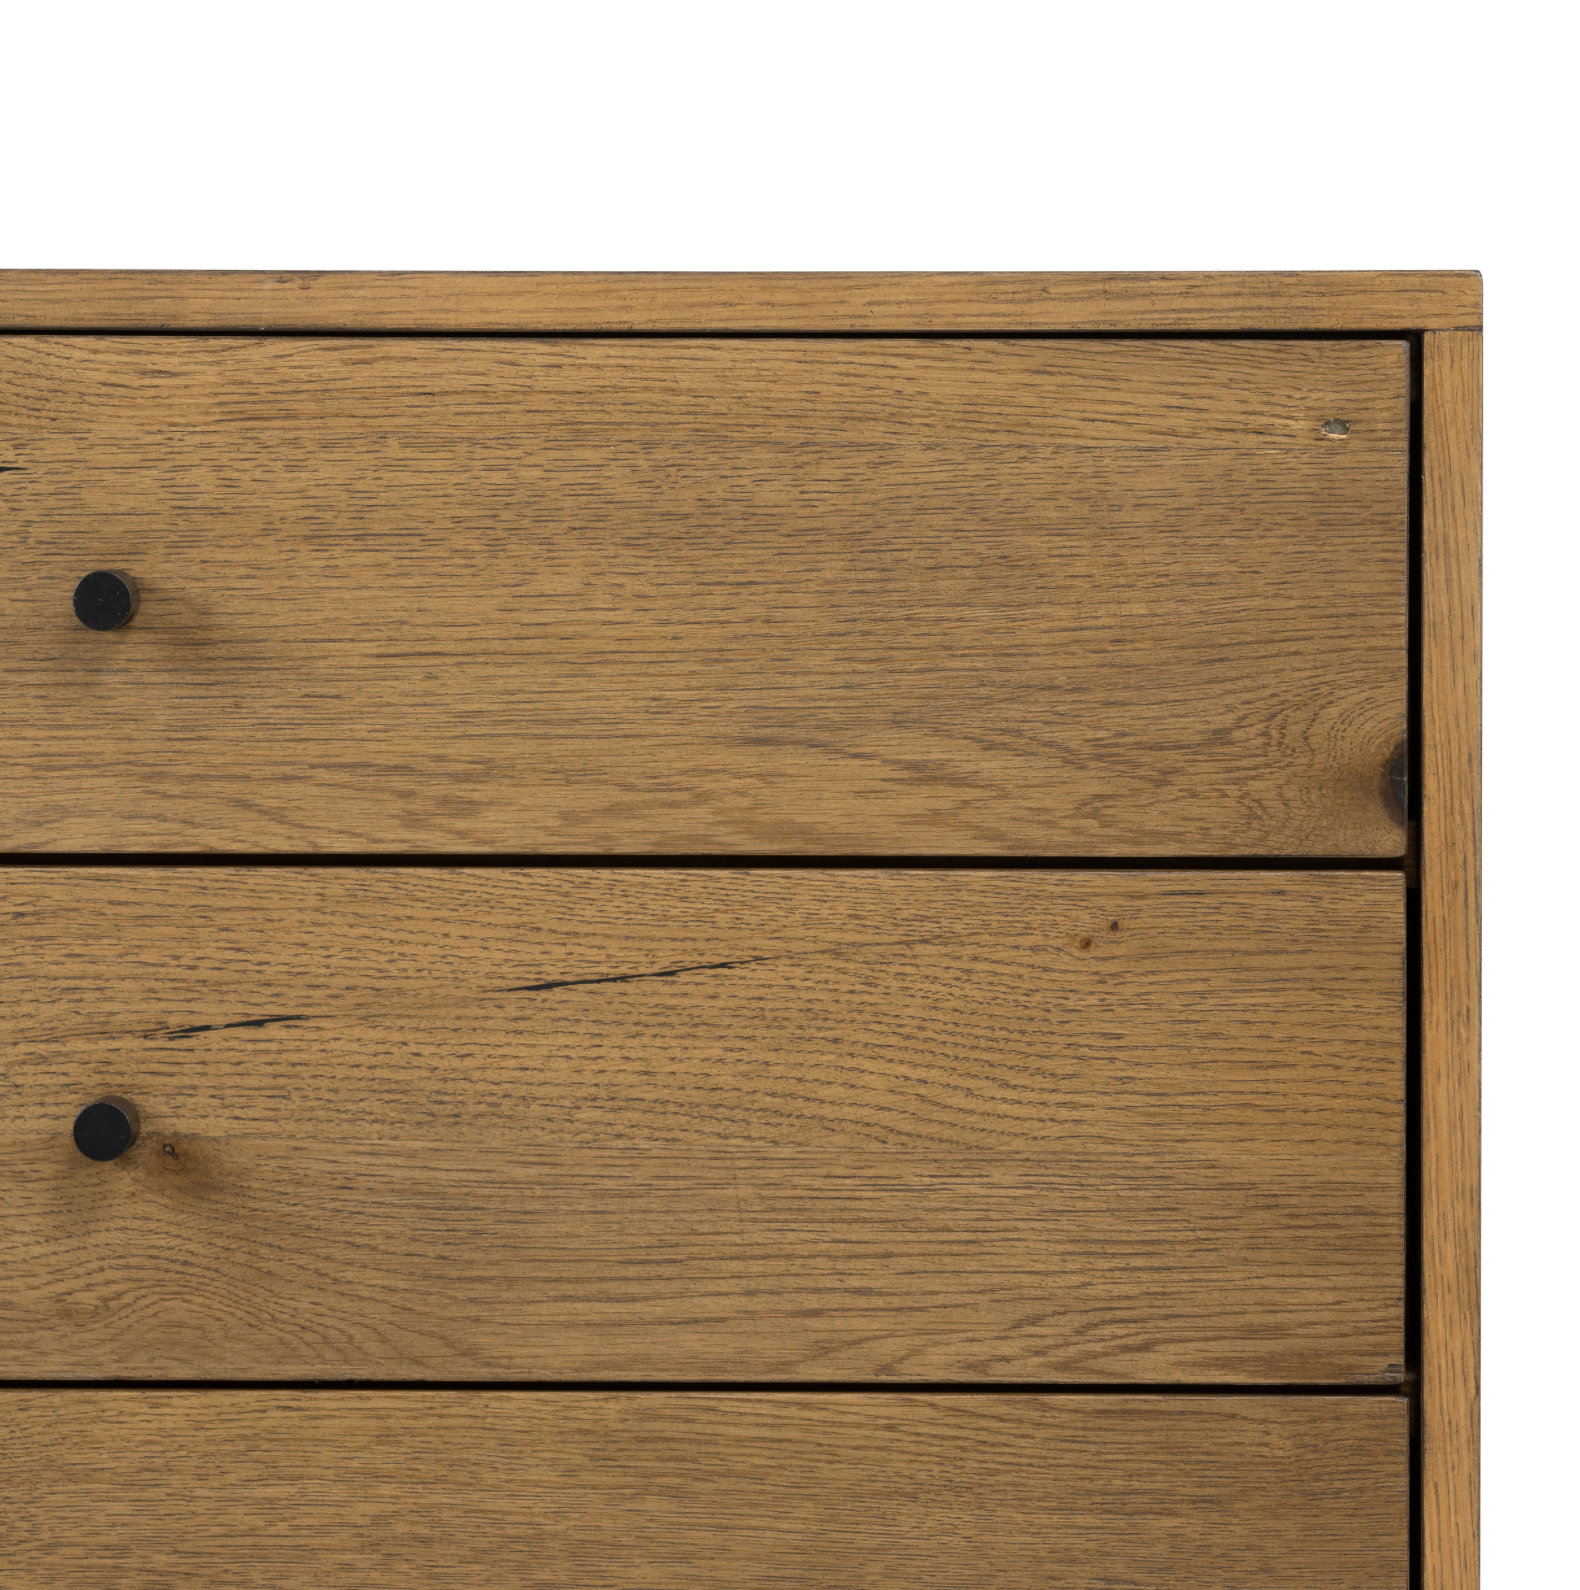 Clean and streamlined. Amber-finished oak features three large drawers plus gunmetal-finished hardware, for a look that's always in style. Dark resin plays up woods' natural graining.